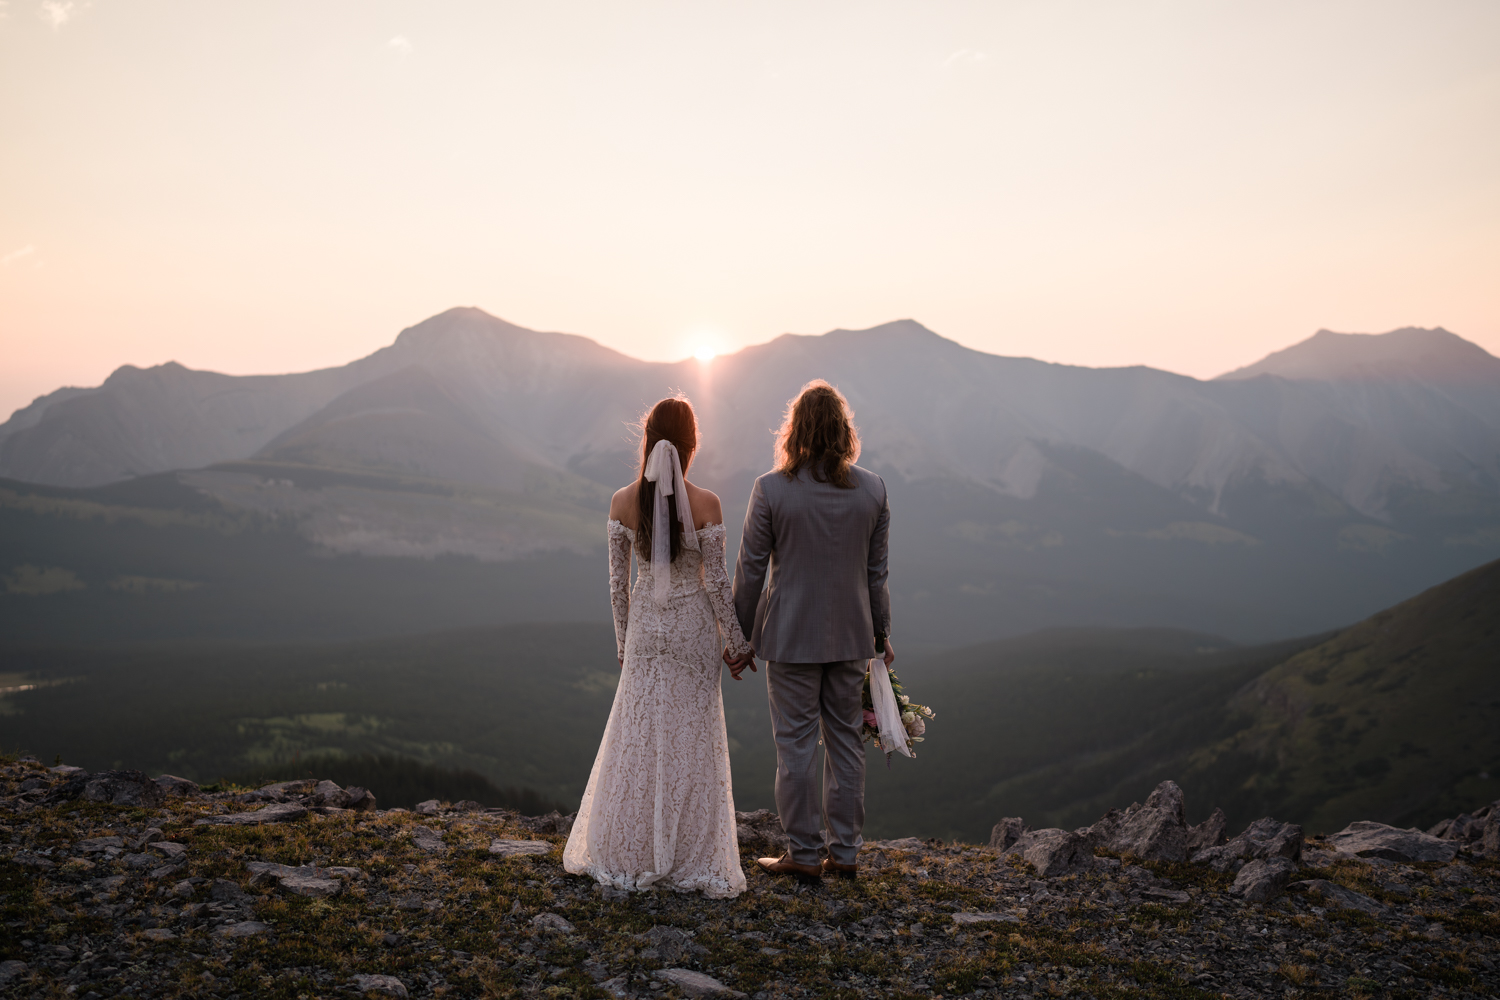 The rising sun casting a golden glow on the couple during their intimate backcountry camping elopement in Alberta's Kananaskis.